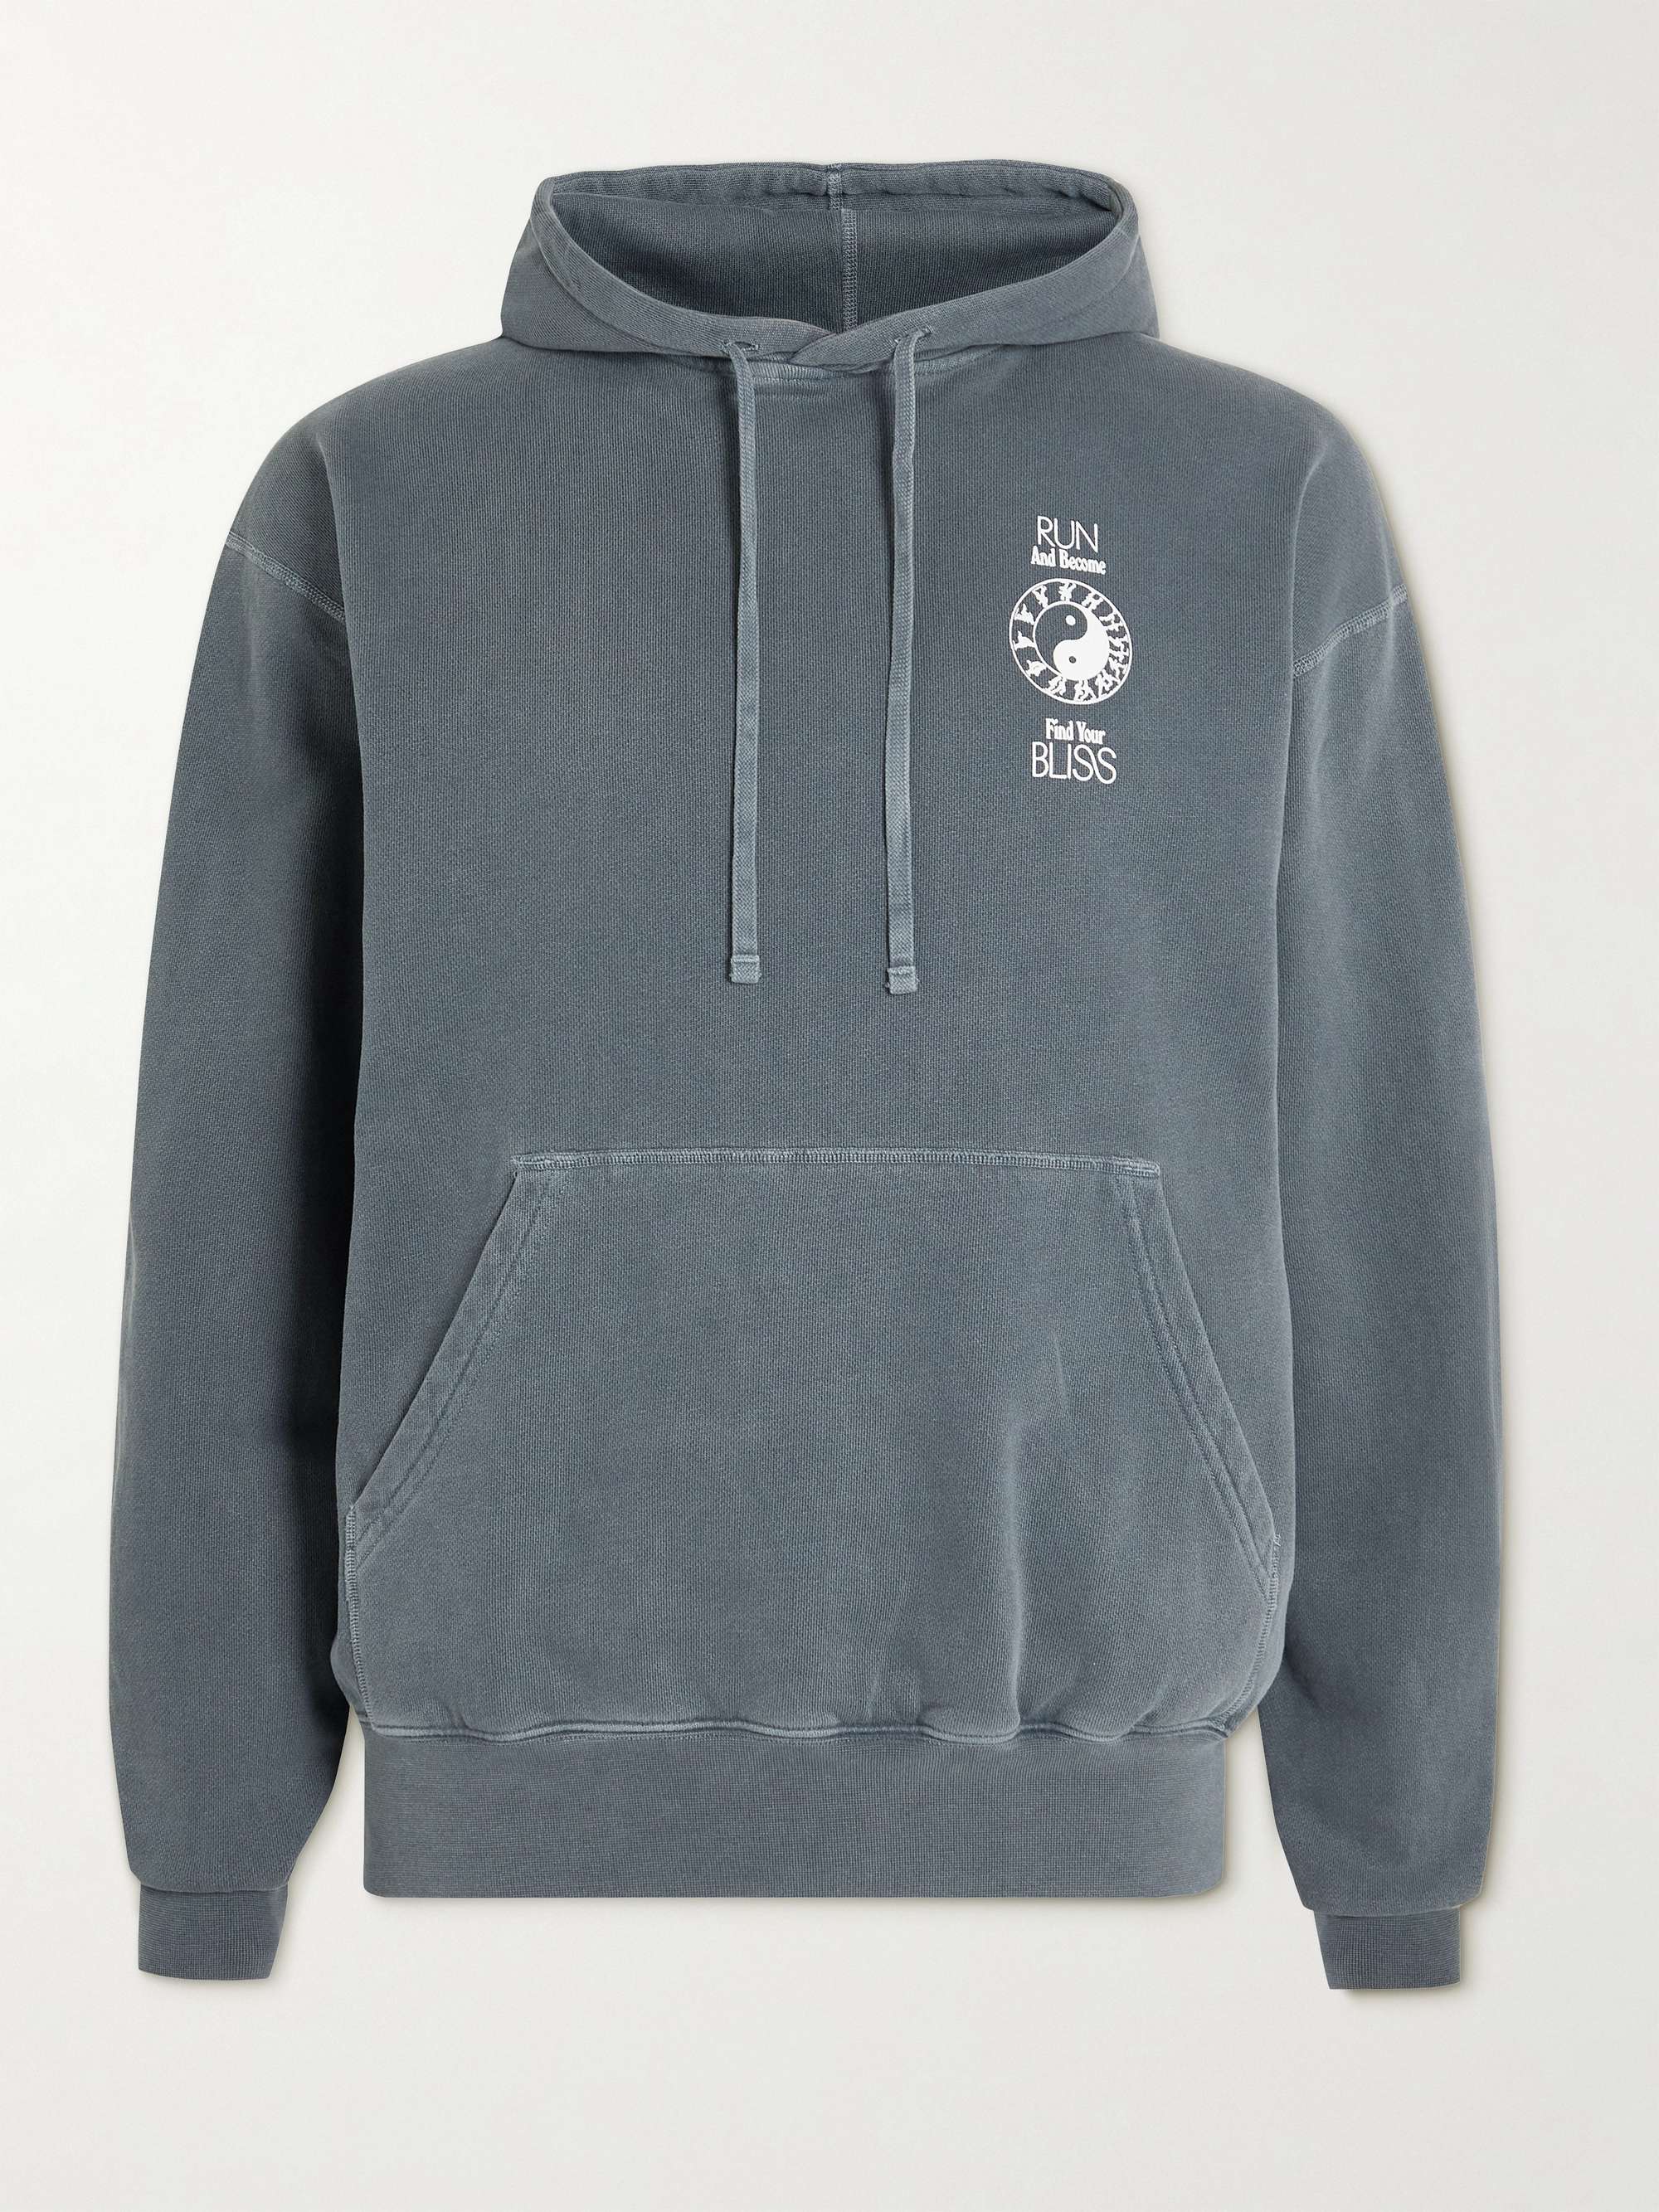 REIGNING CHAMP + Ryan Willms Garment-Dyed Printed Cotton-Blend Jersey Hoodie